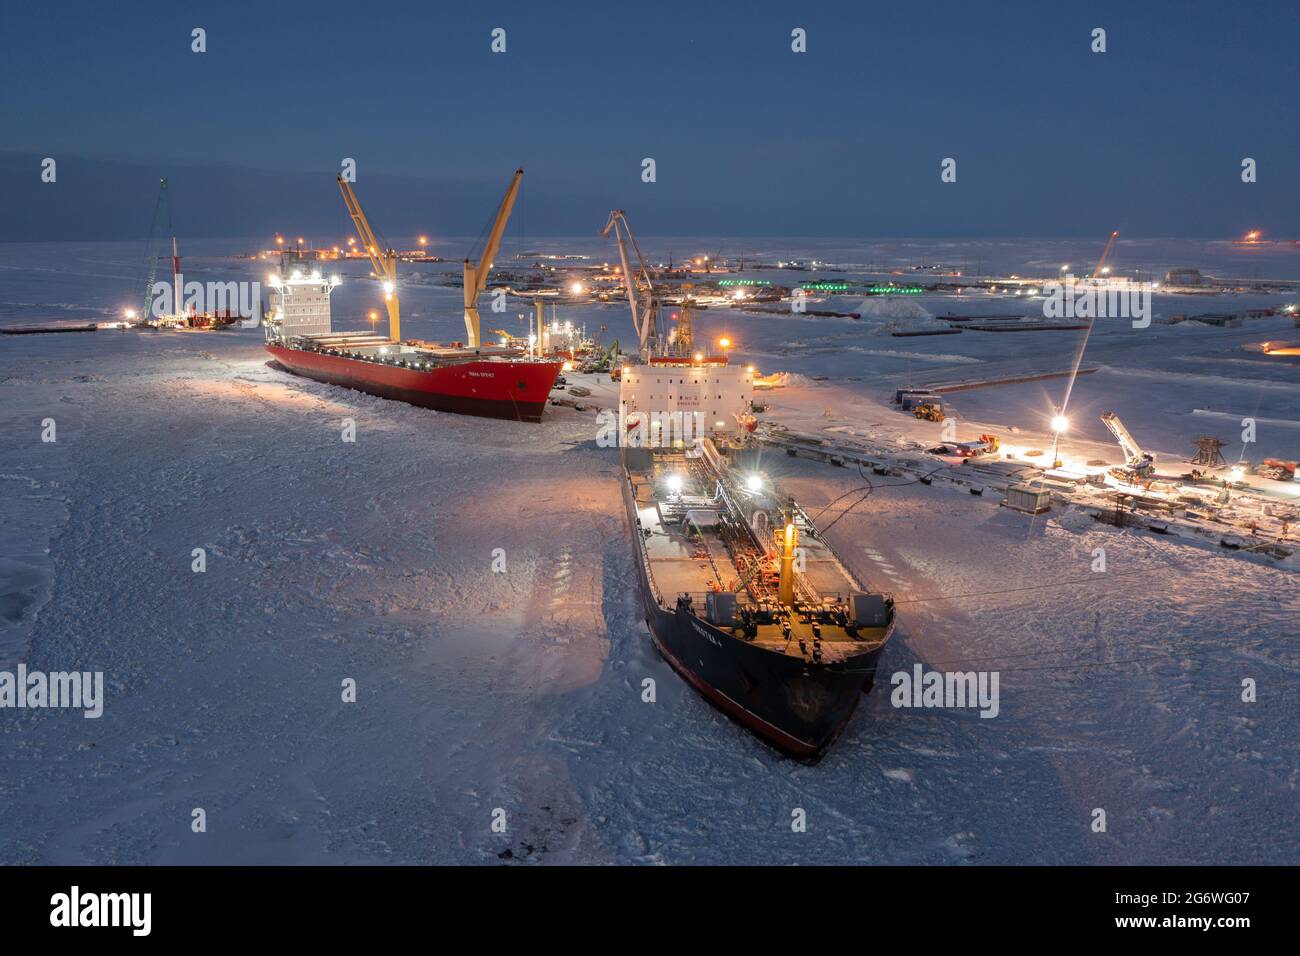 Sabetta, Tyumen region, Russia - December 07, 2020:The ship is engaged in cargo operations at the berth. The ship is frozen into the ice. Stock Photo